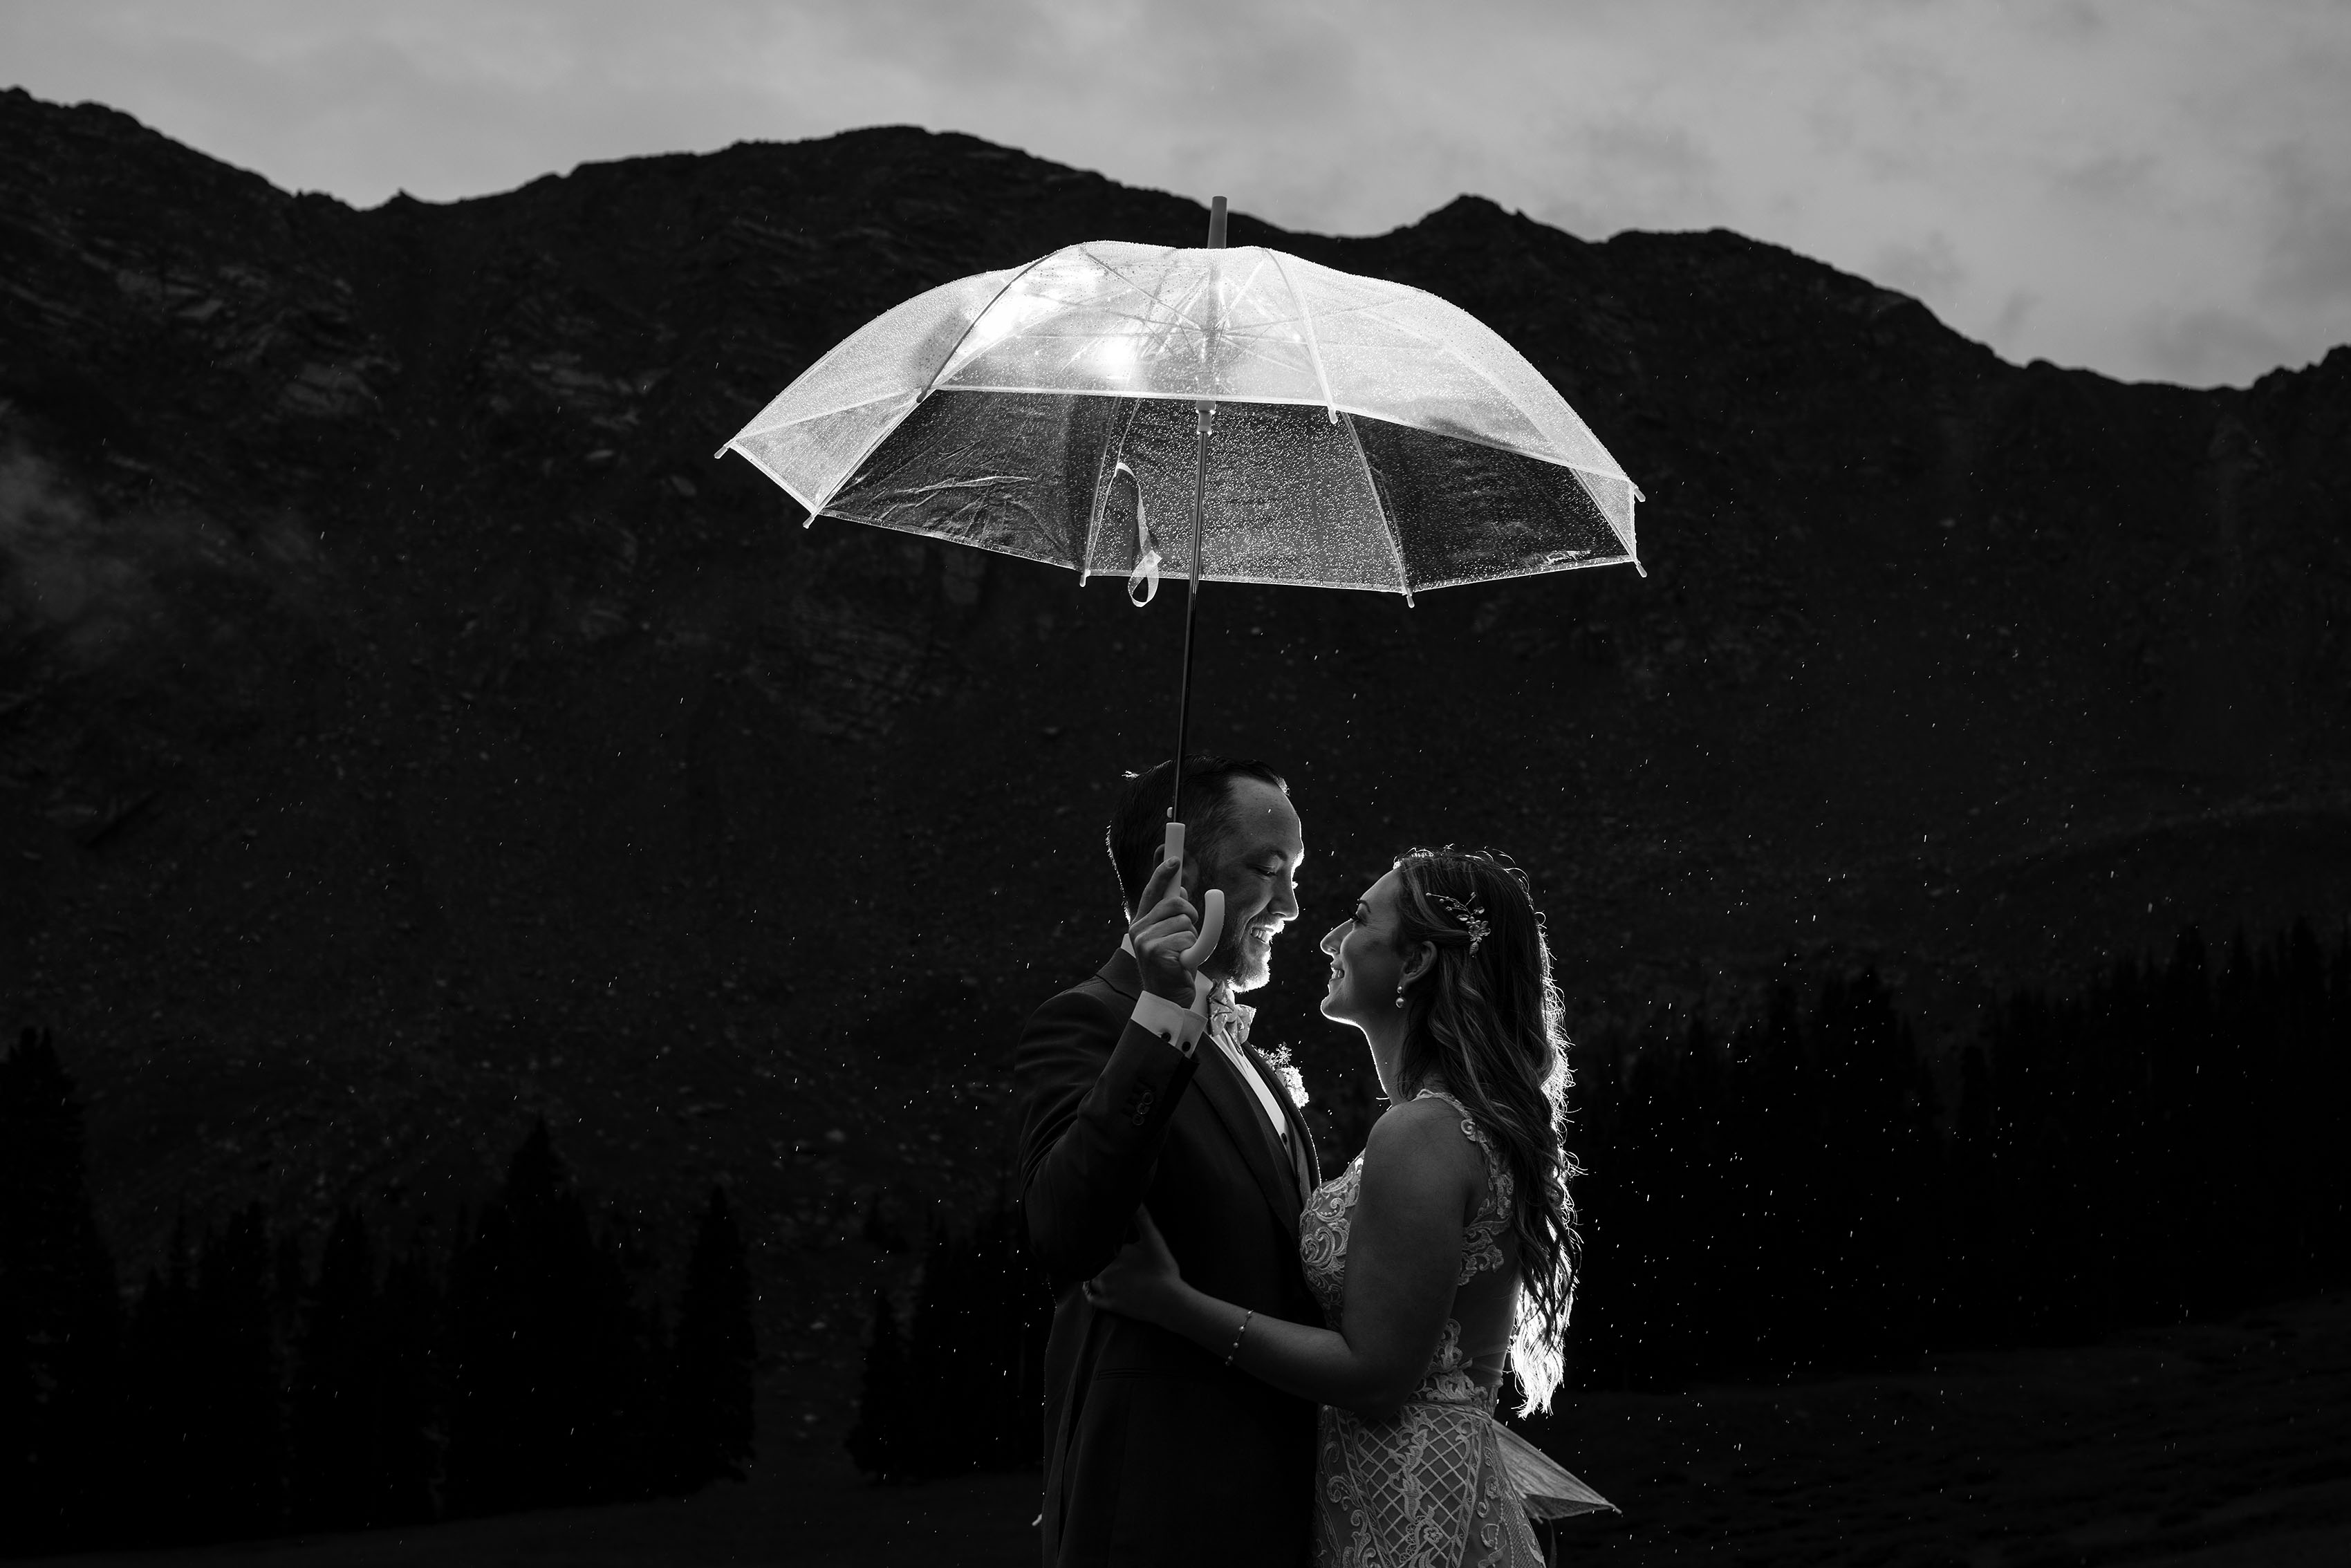 The newlyweds pose under and umbrella as it rains at A Basin